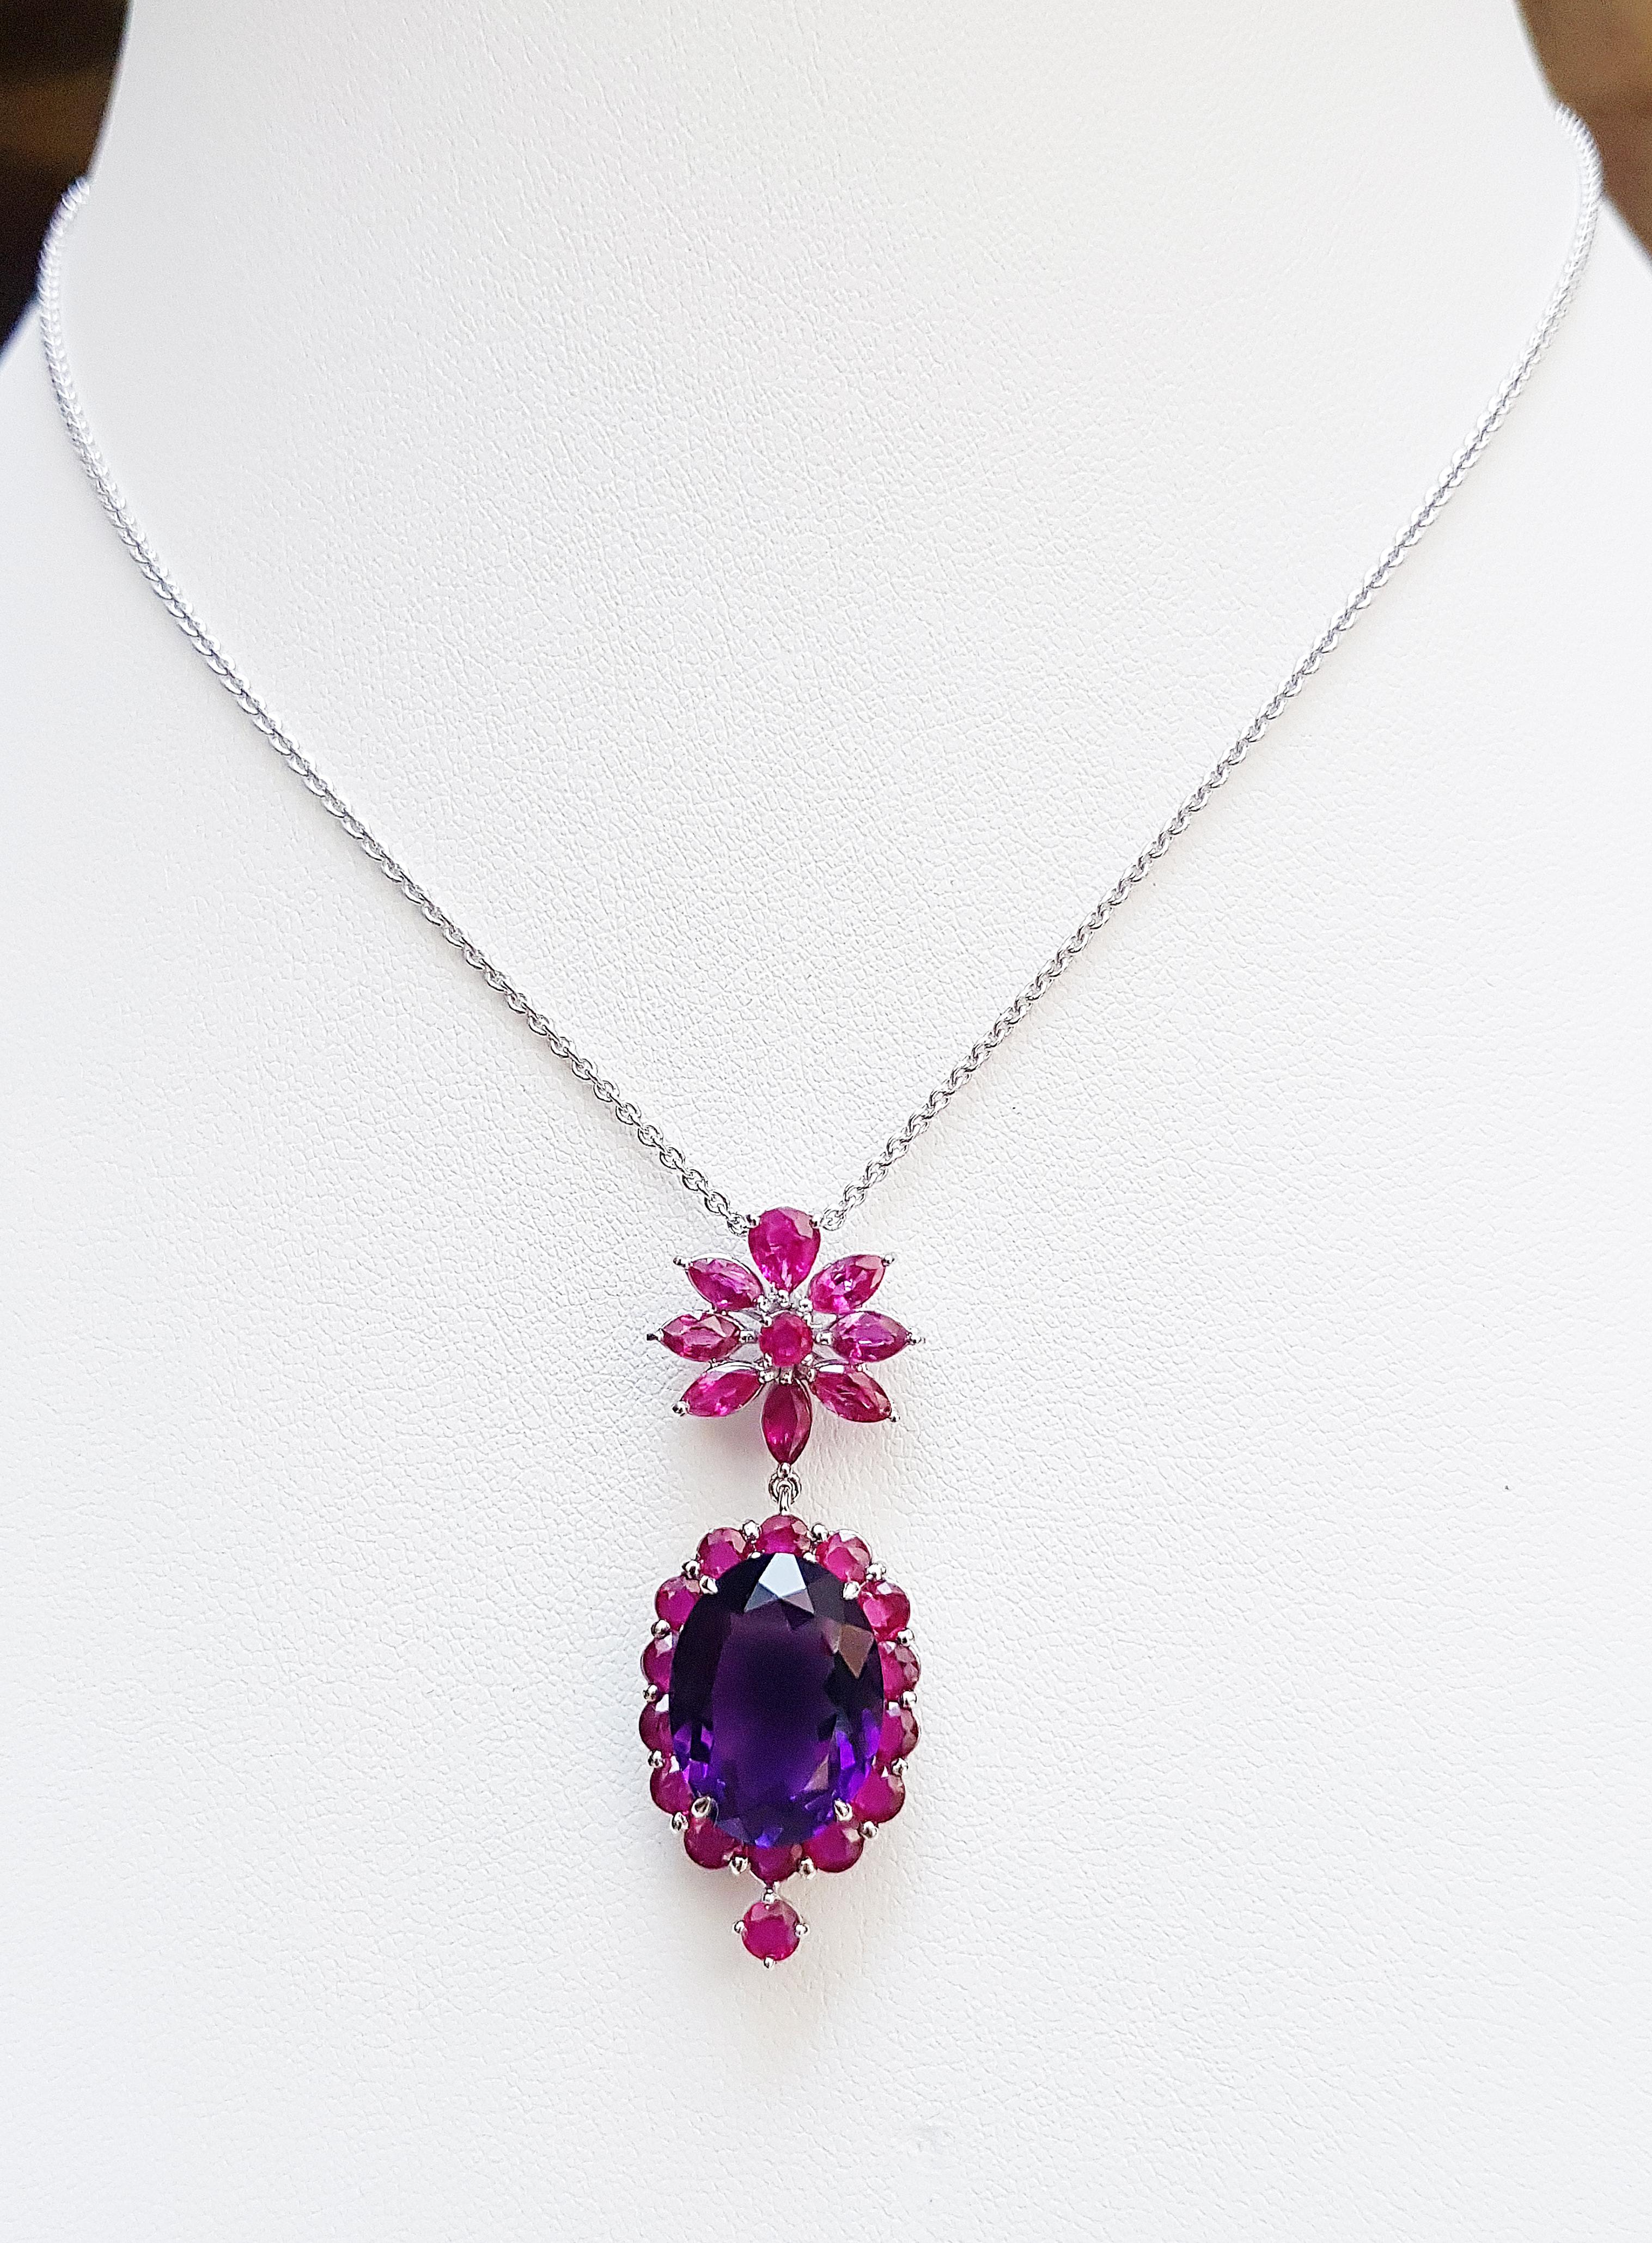 Amethyst 7.87 carats with Ruby 4.98 carats Pendant set in 18 Karat White Gold Settings
(chain not included)

Width:  1.6 cm 
Length: 4.1 cm
Total Weight: 7.71 grams

